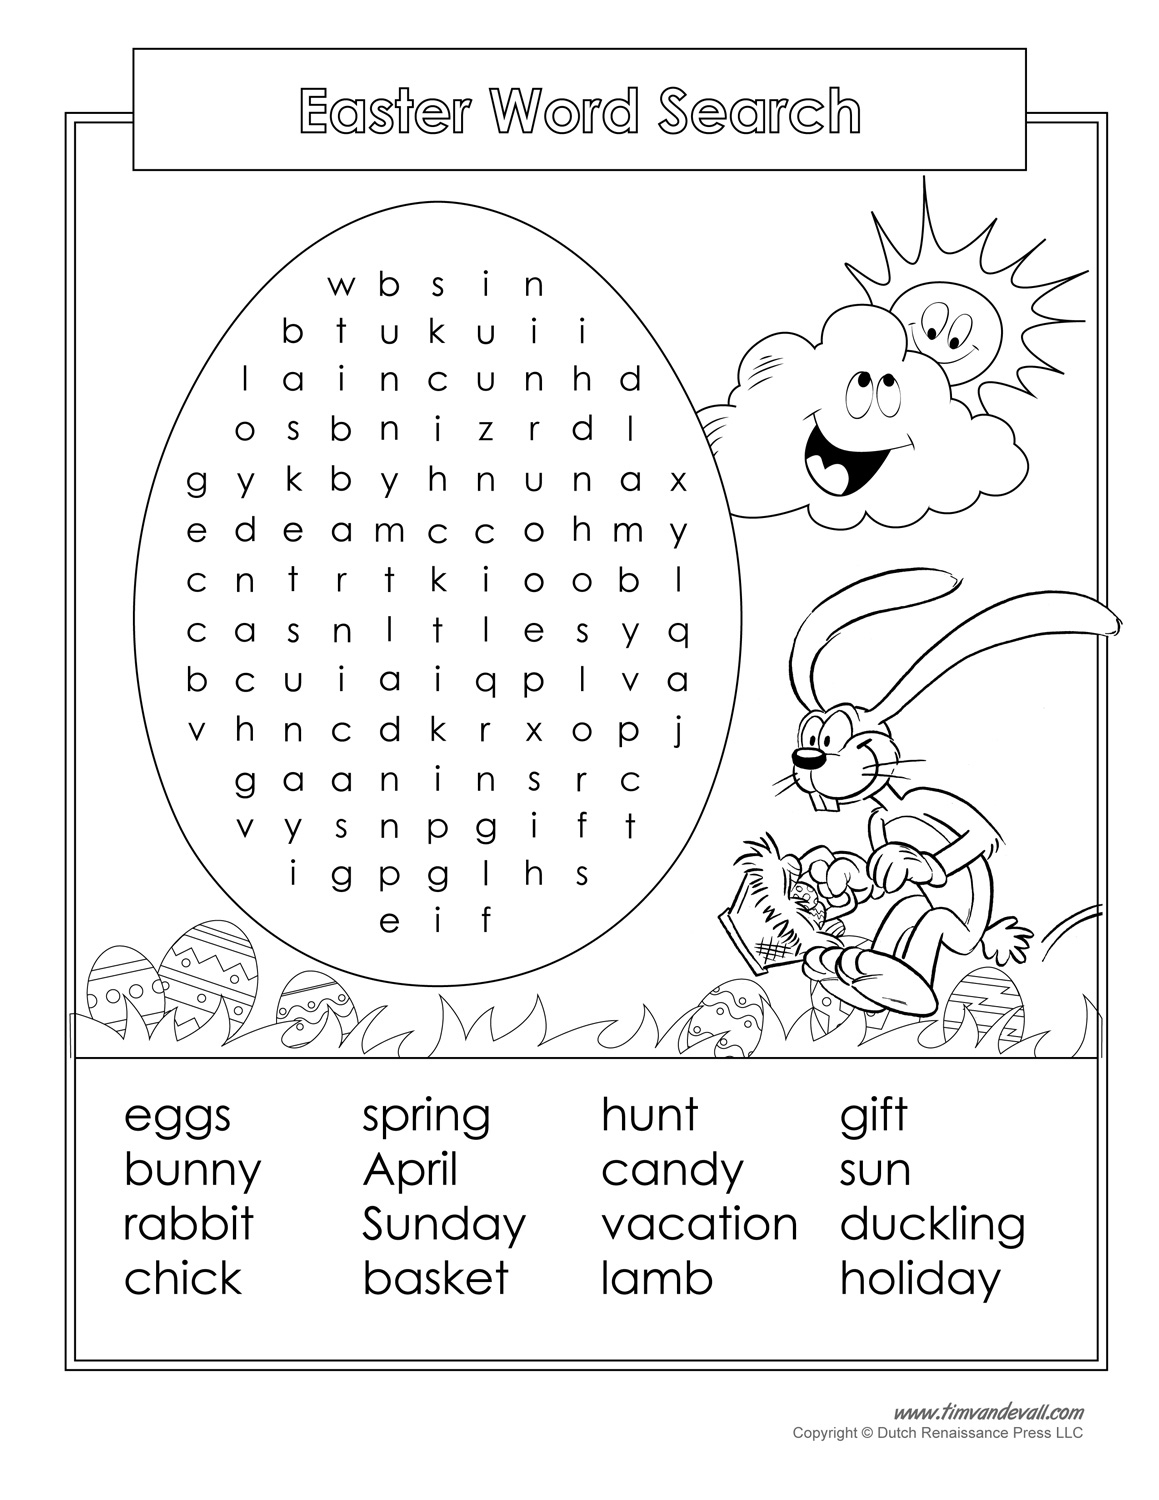 16 Printable Easter Word Search Puzzles | Kittybabylove - Free - Printable Easter Puzzles